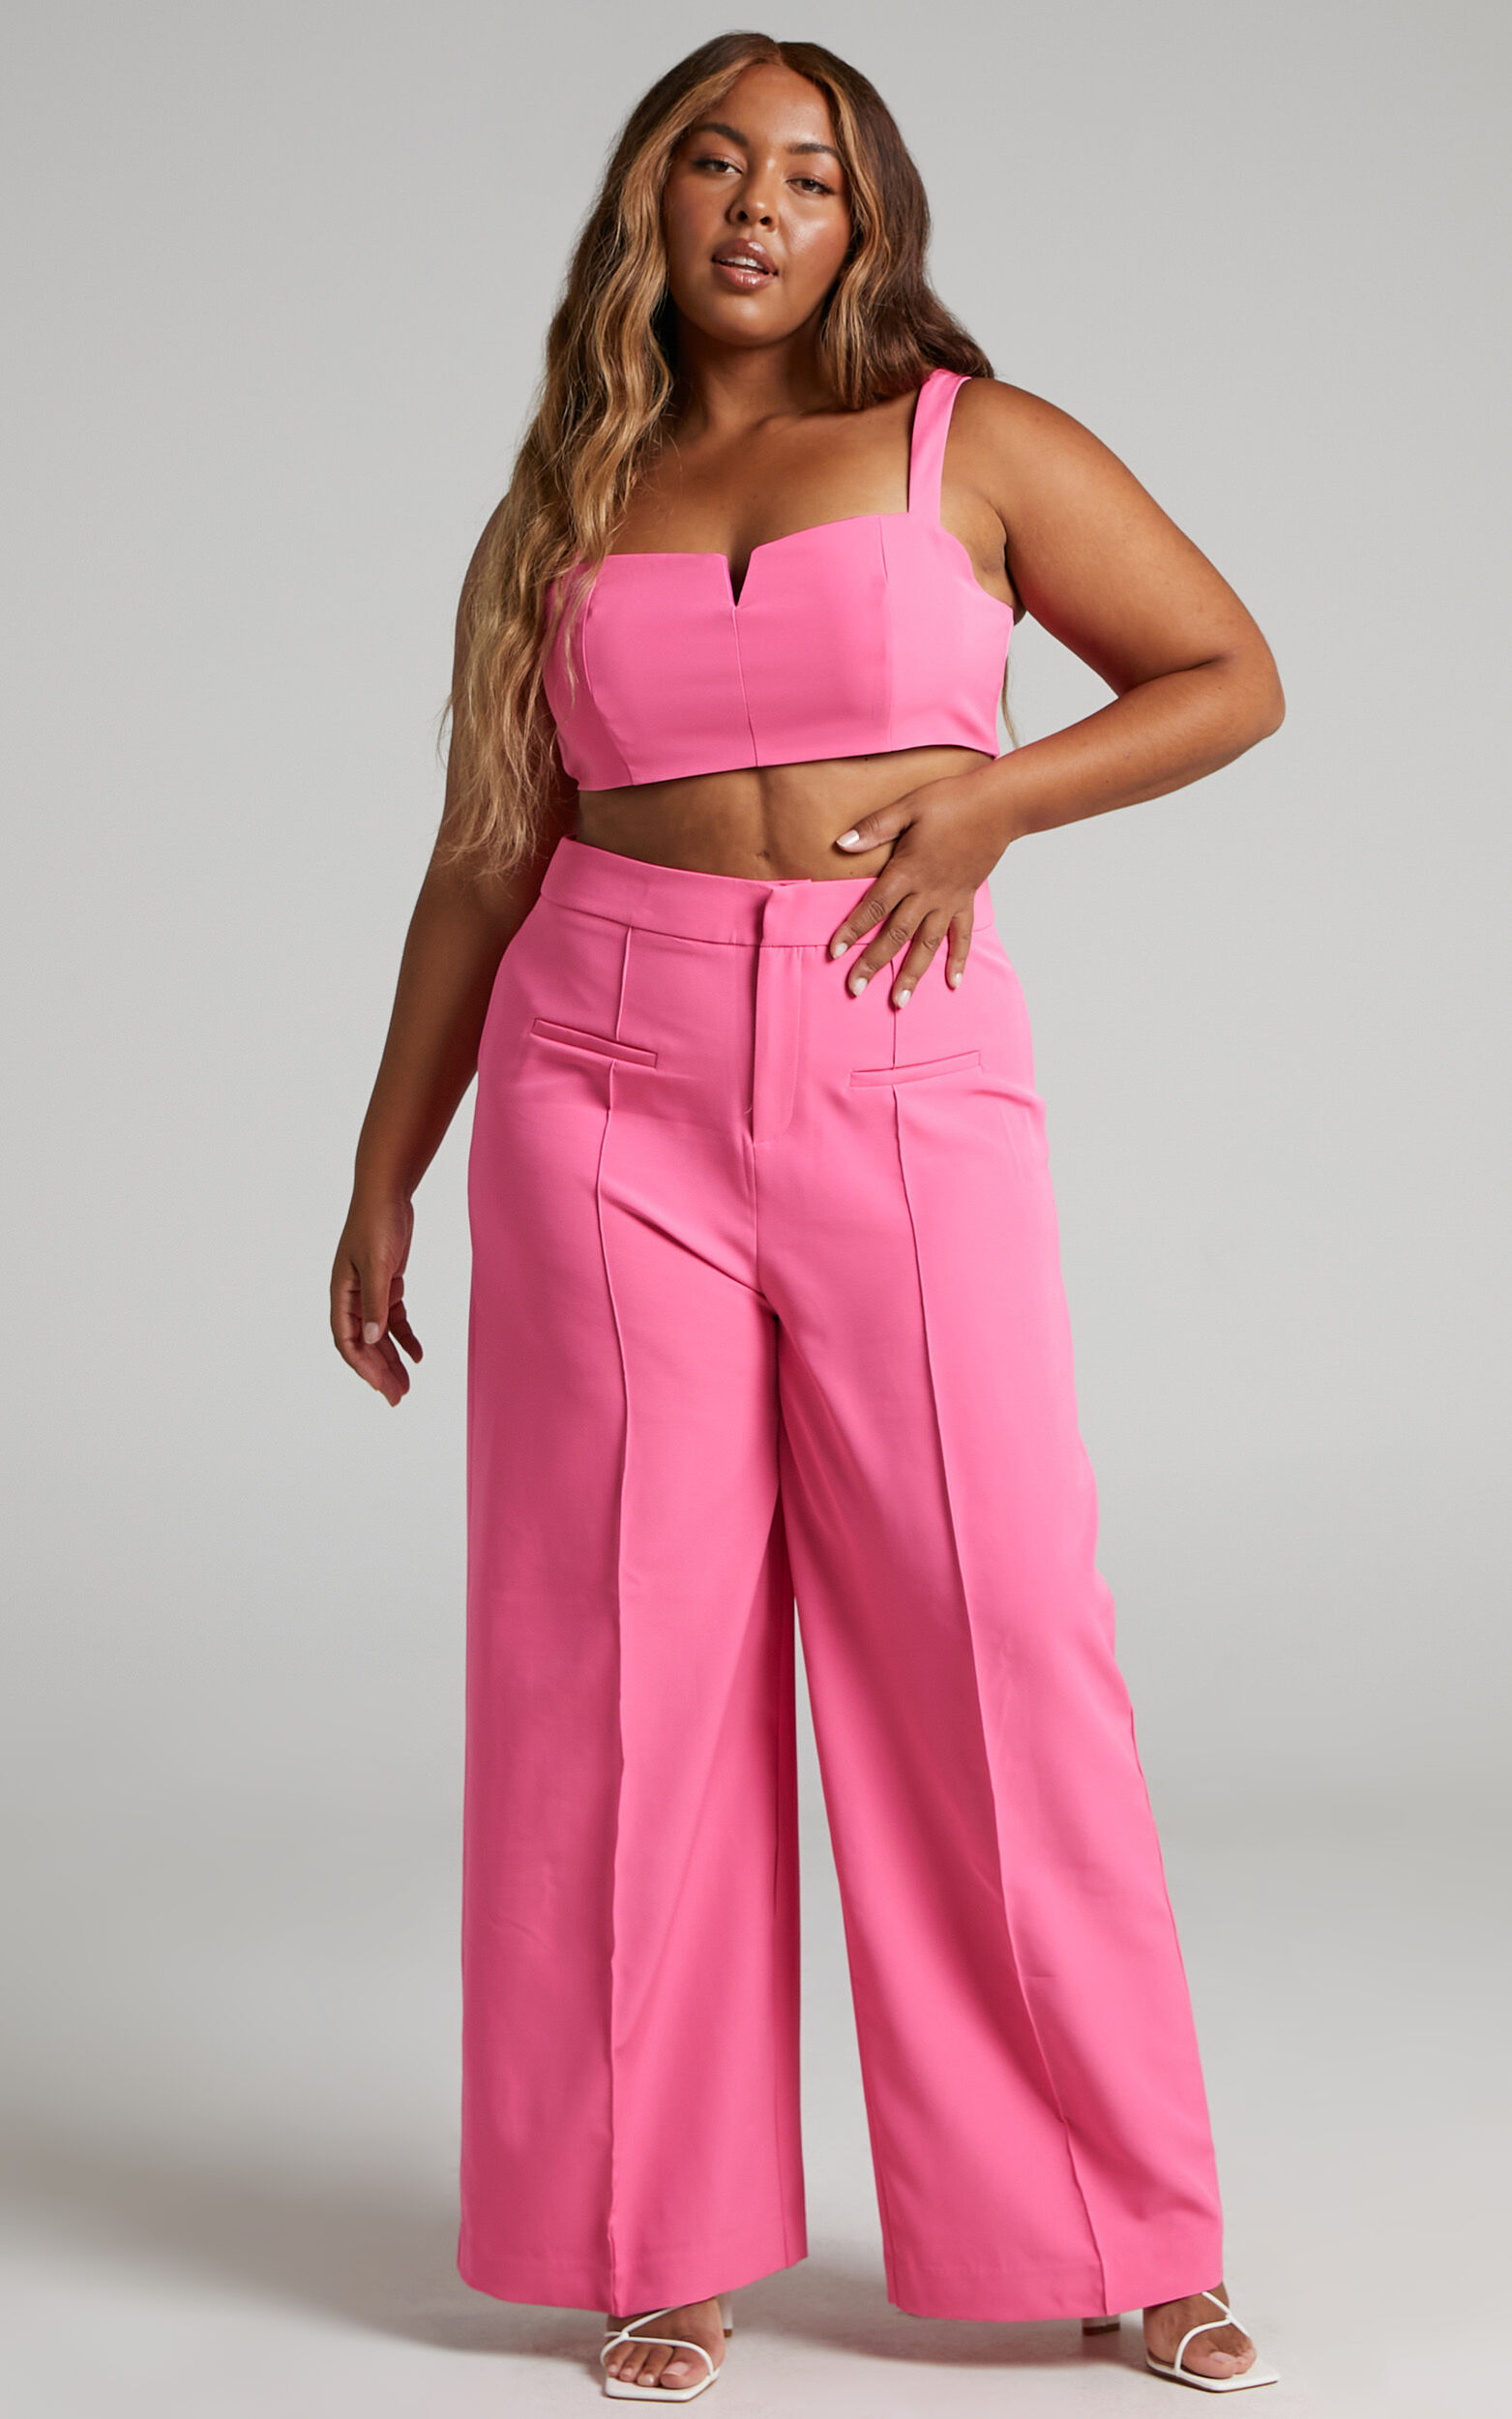 https://images.showpo.com/dw/image/v2/BDPQ_PRD/on/demandware.static/-/Sites-sp-master-catalog/default/dwa92442a4/images/maida-v-front-bralet-and-co-ord-pant-SC22030014/Maida_V-Front_Crop_Top_and_Wide_Leg_Pants_Two_Piece_Set_in_Pink_2528SC22030014022529.jpg?sw=1563&sh=2500